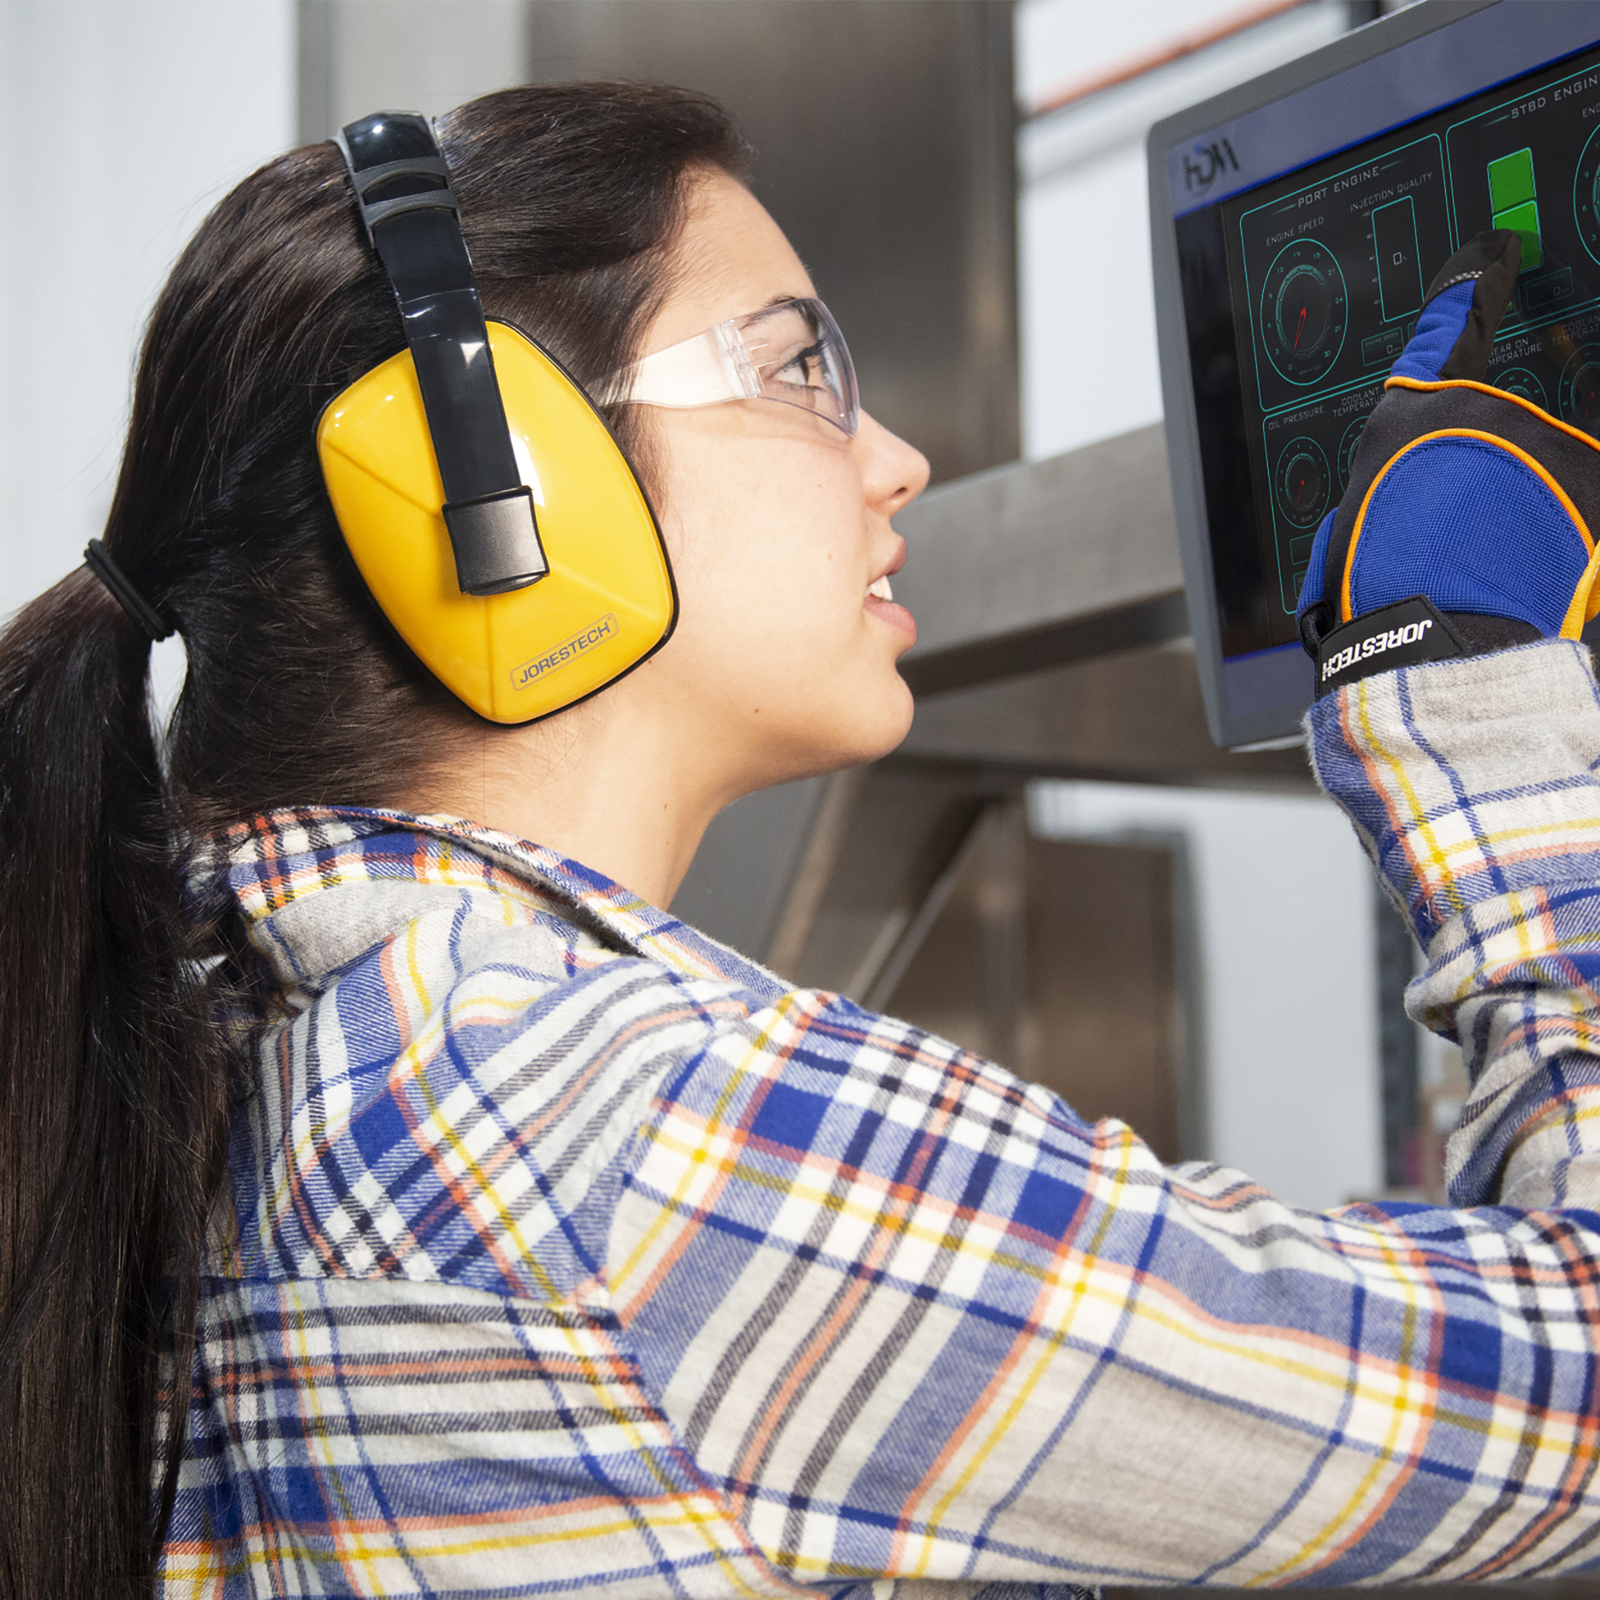 A woman wearing safety eye glasses, gloves and JORESTECH hearing protection ear muffs while operating a large loud machine